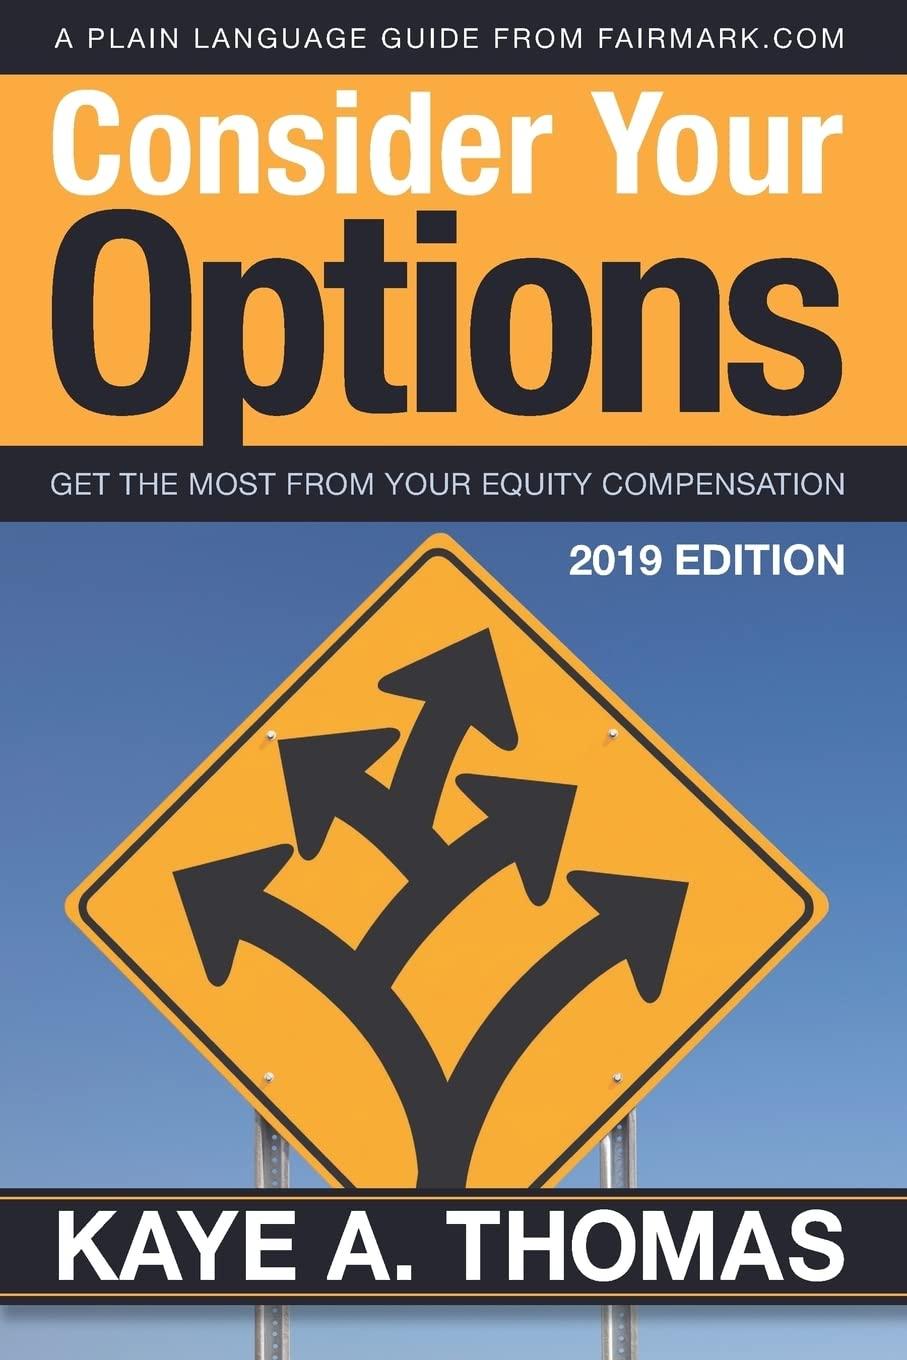 consider your options get the most from your equity compensation 2019th edition kaye a. thomas 1938797094,